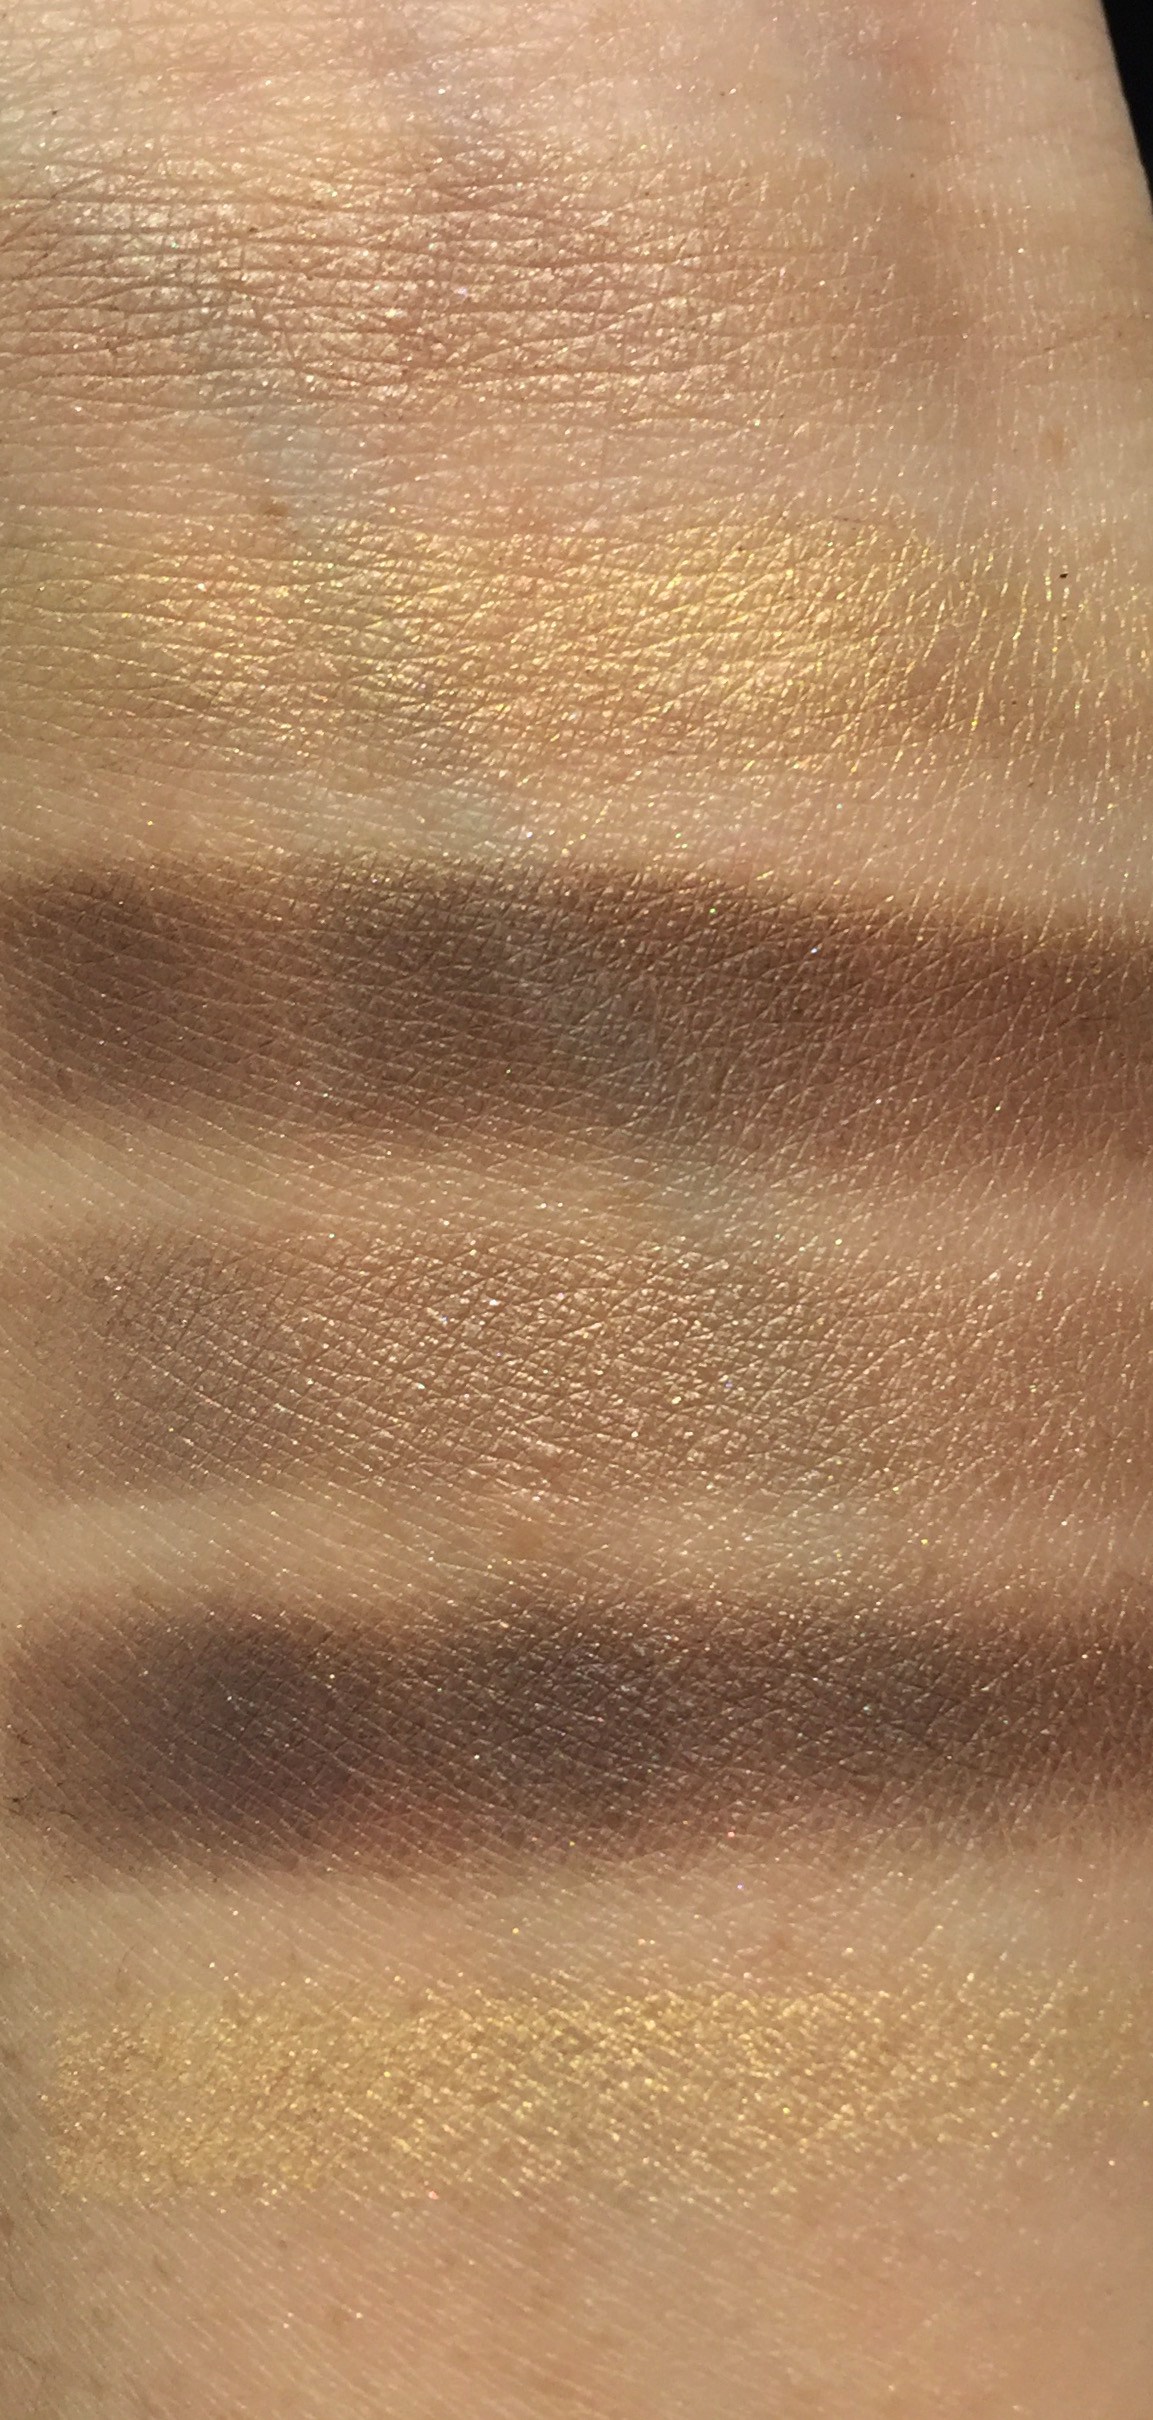 Ombres-Lamees-de-Chanel-swatches.jpg